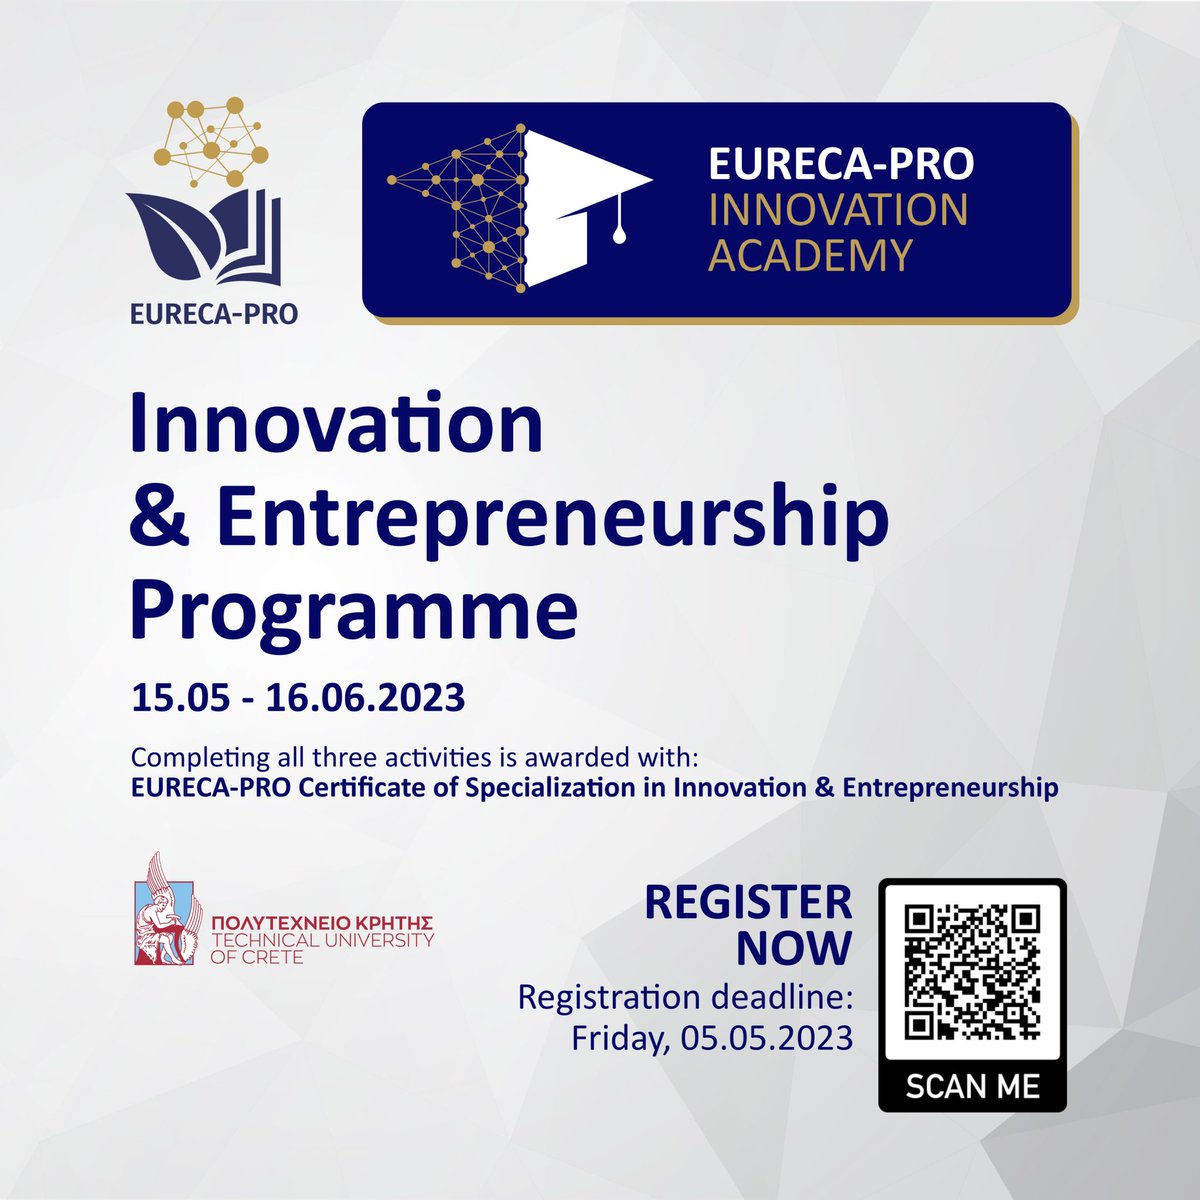 Take your #Innovation & #Entrepreneurship journey a step further and register to the @EurecaPro Innovation Academy Innovation & Entrepreneurship #Programme  💡👨‍🎓

📌 Learn more: bit.ly/40xilXC

#training #RD #sustainabledevelopment

@EIT_HEI  @EITeu